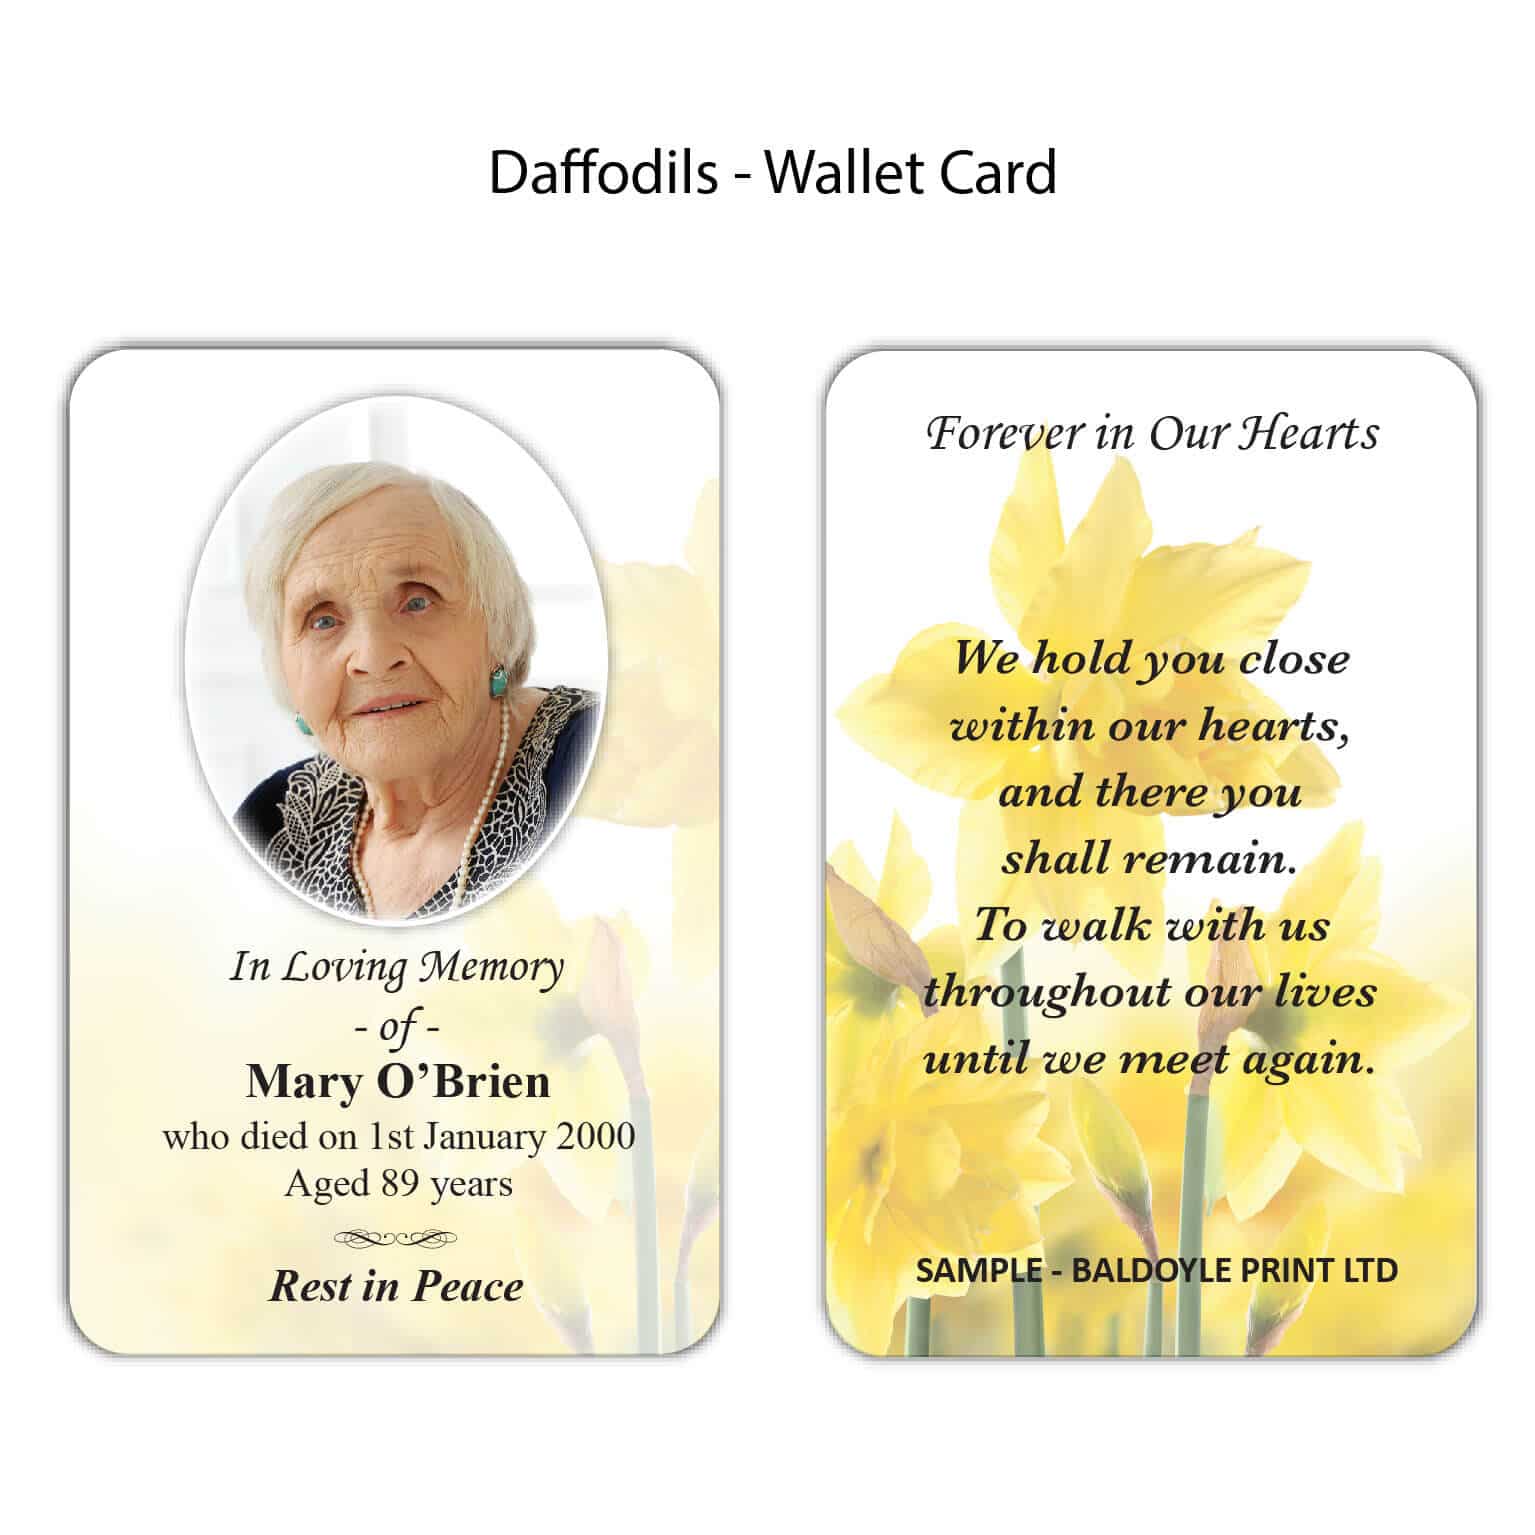 Daffodils Wallet Cards